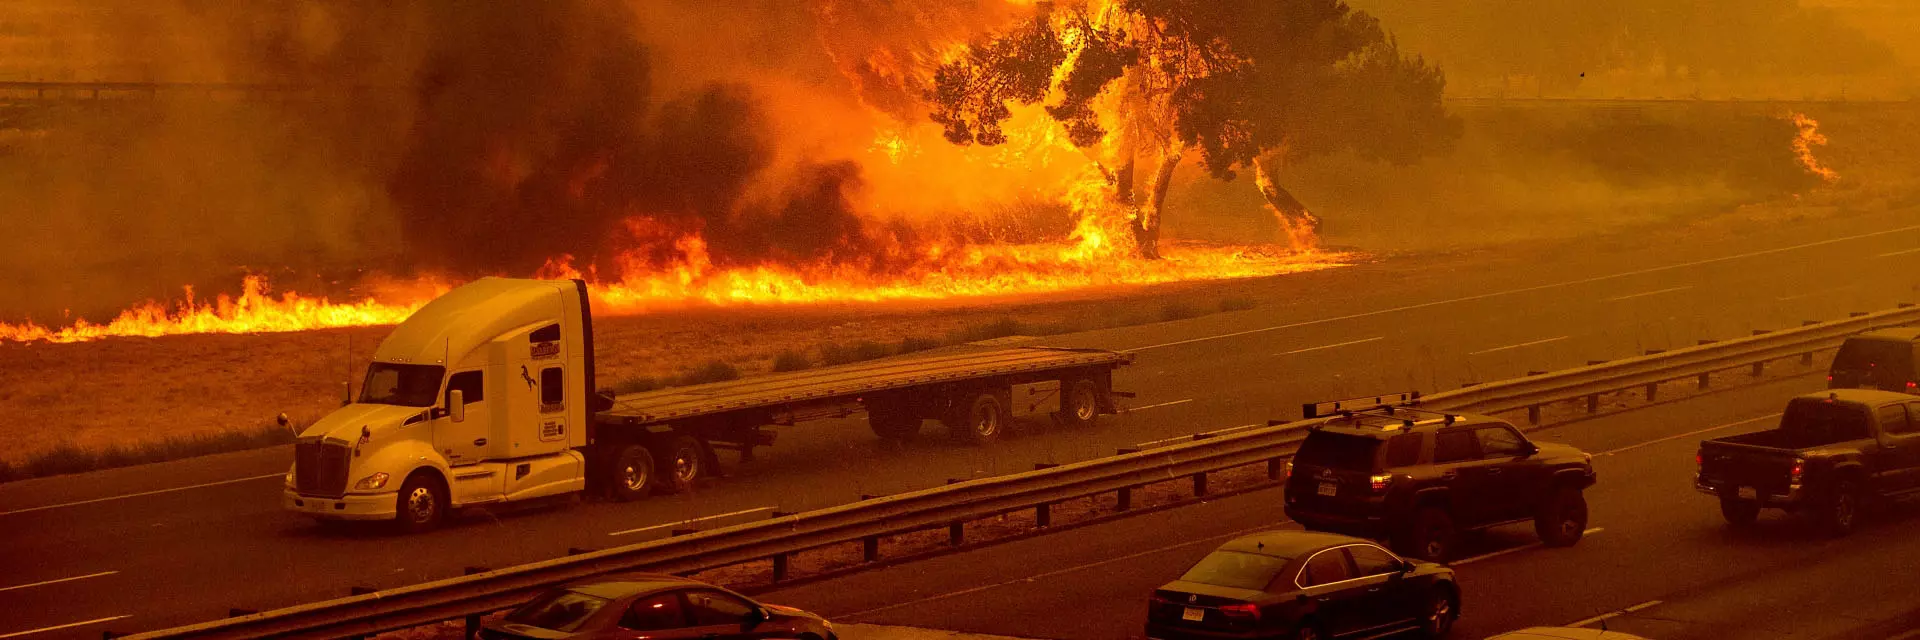 A tree and grass burn on the side of a highway as cars and large truck pass by